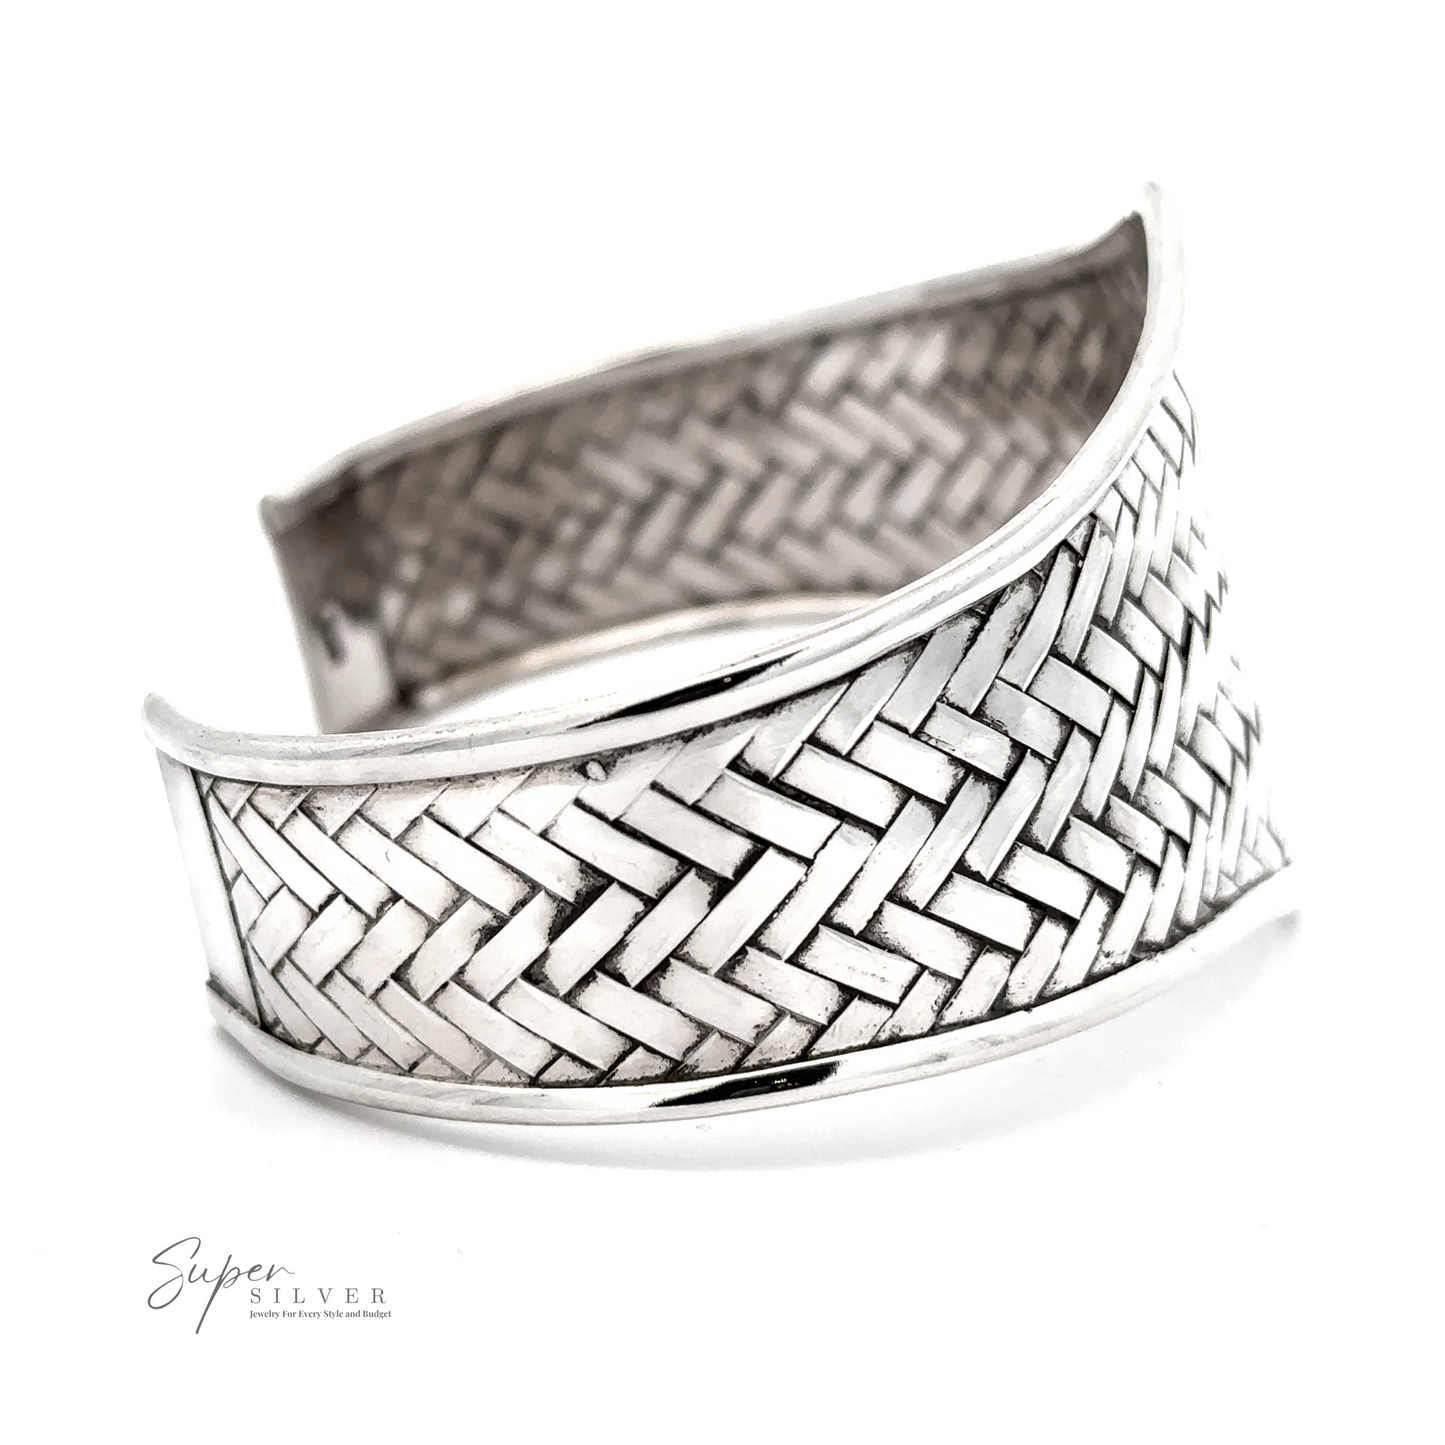 
                  
                    A Wide Diamond Shaped Basket Weave Cuff Bracelet with a basket weave pattern design. The brand name "Super Silver" is visible in the bottom left corner.
                  
                